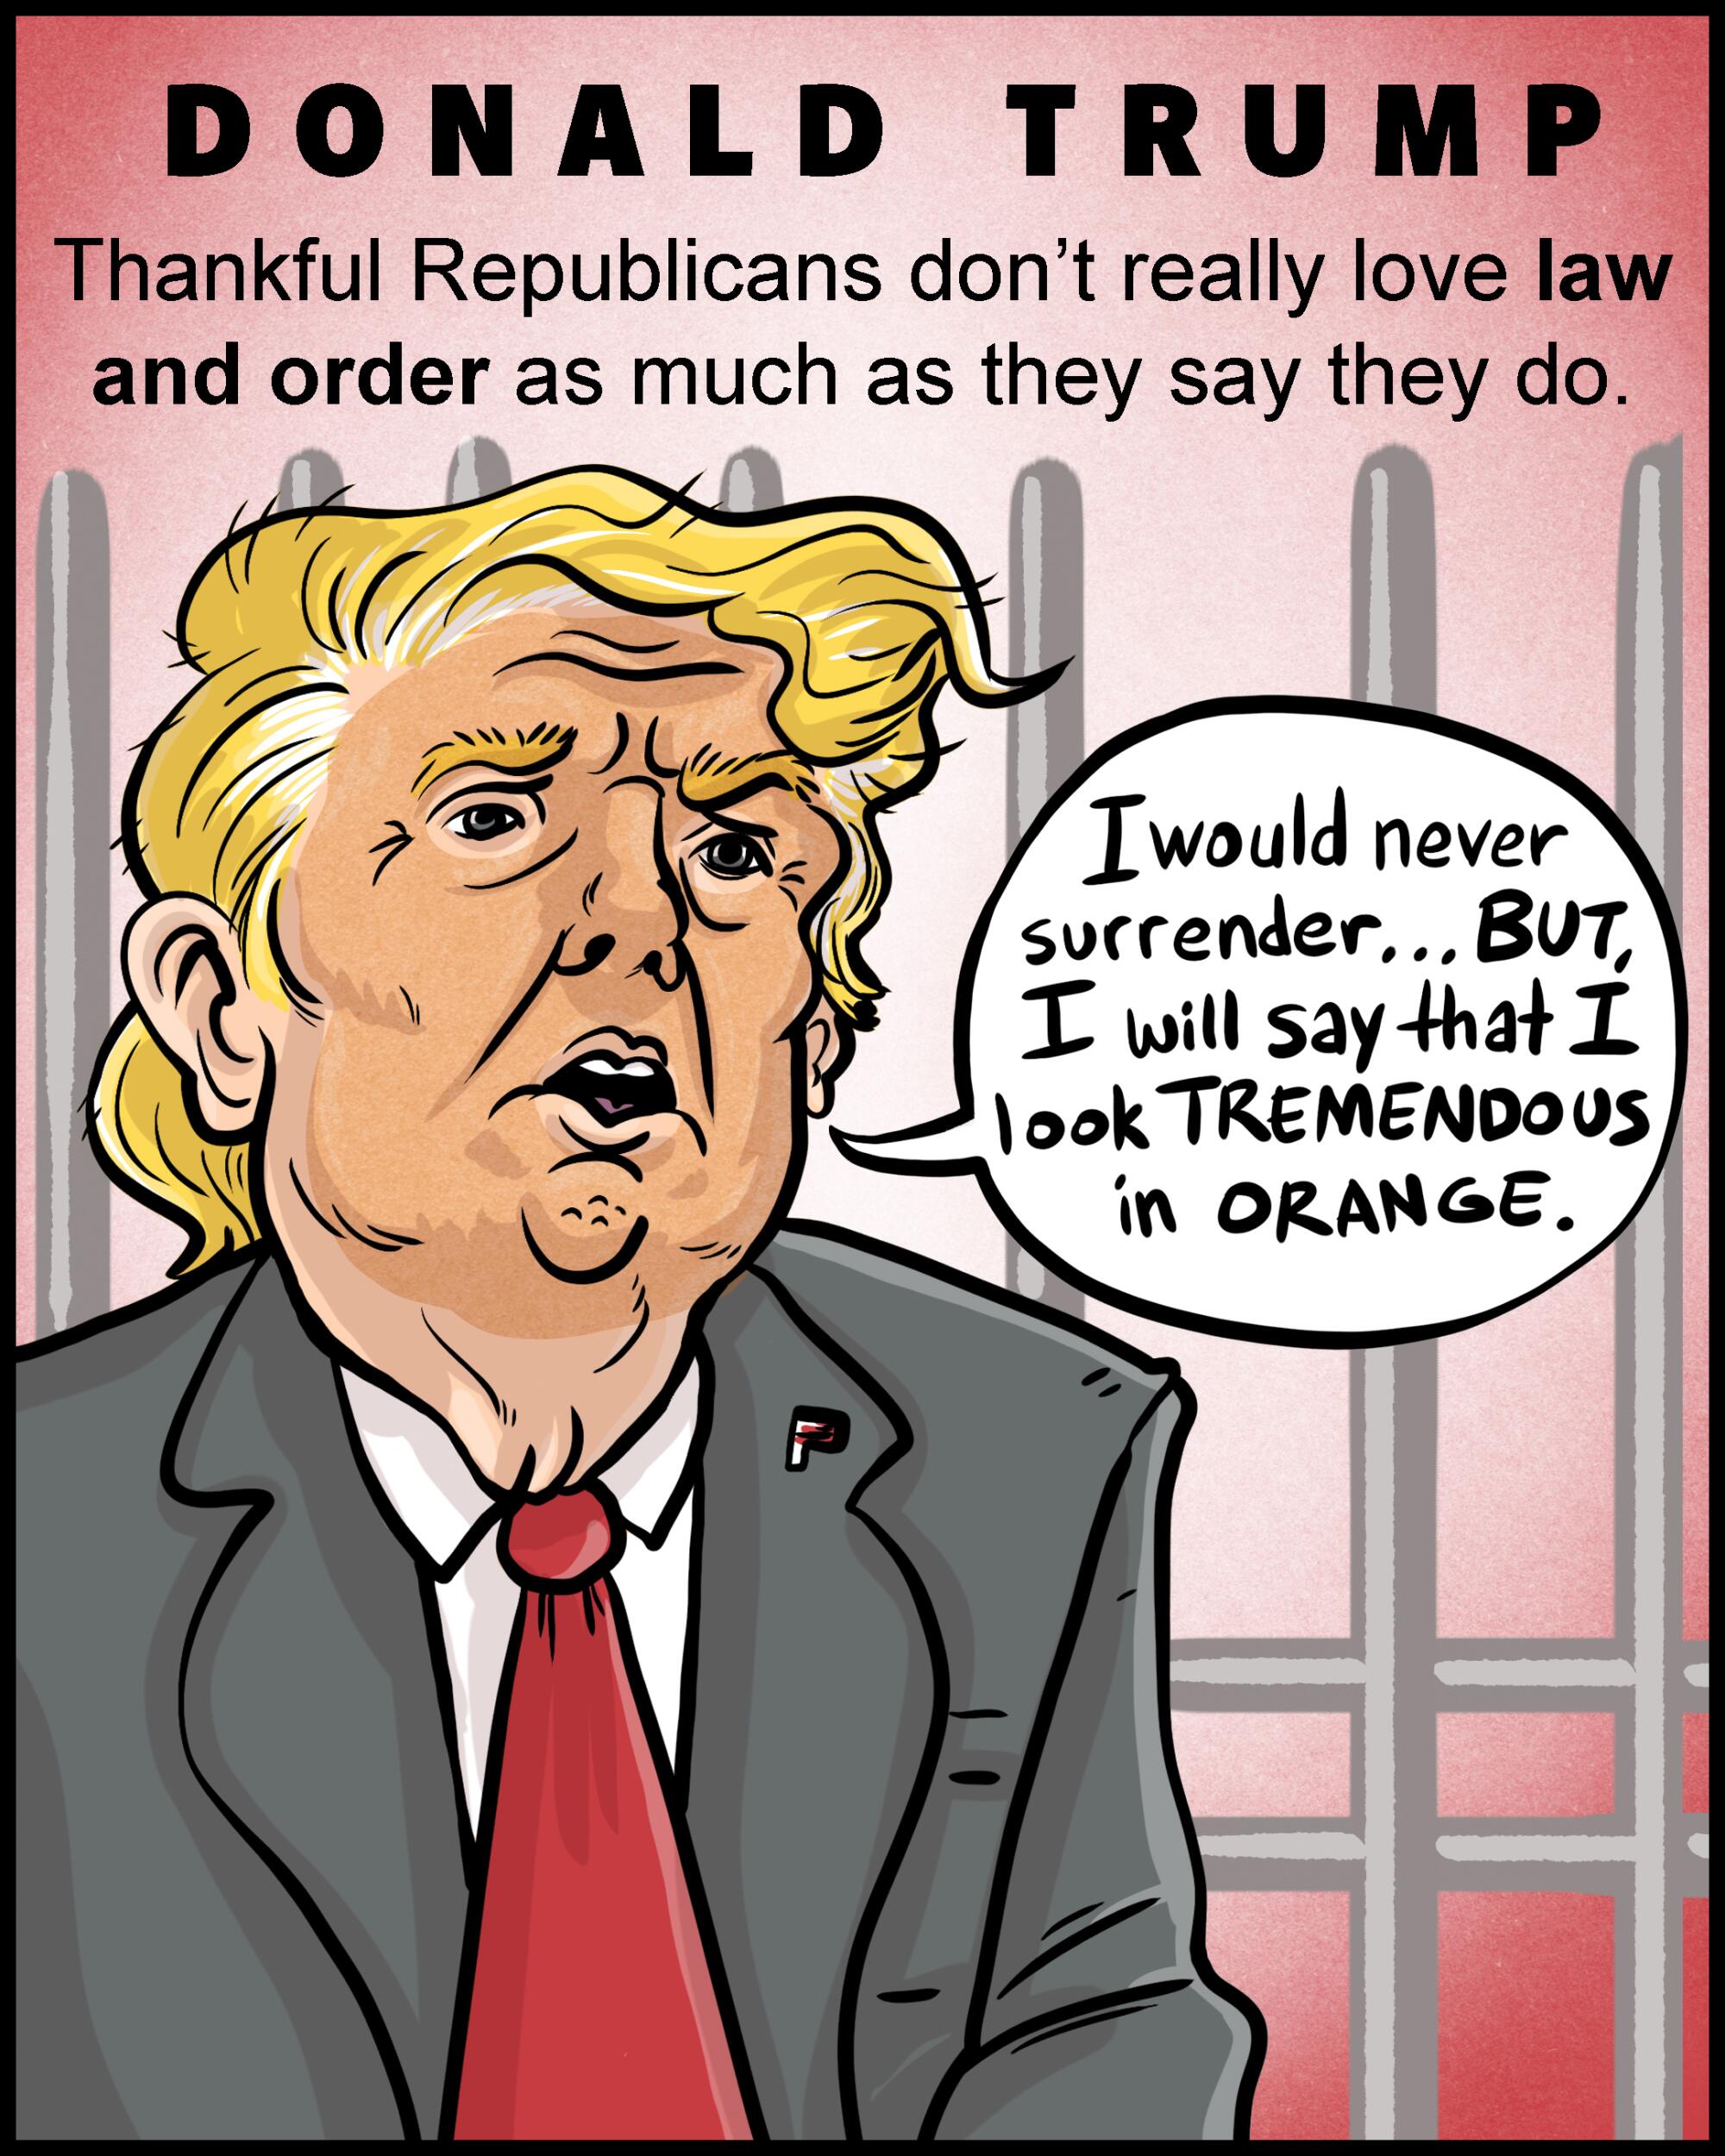 Donald Trump - Thankful Republicans don't really love law and order as much as they say they do.